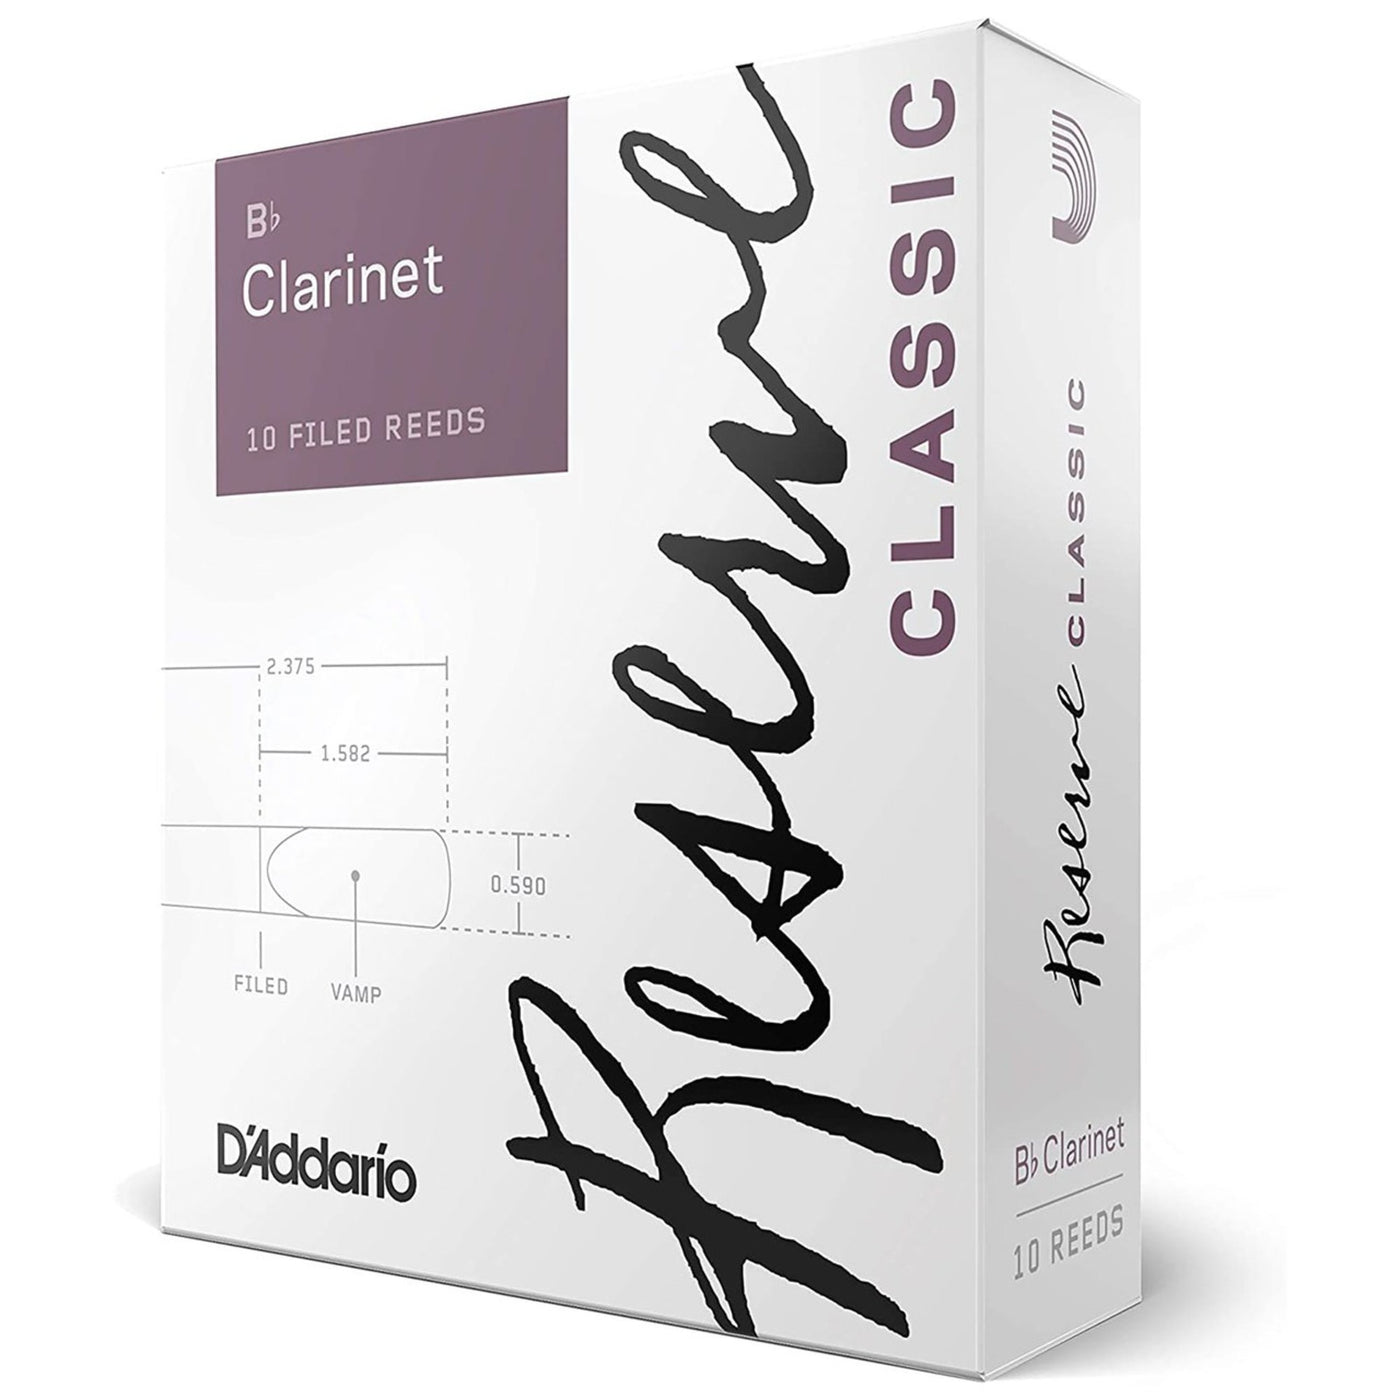 D'Addario Reserve Classic Bb Clarinet Reeds, Strength 2.5, 10-pack